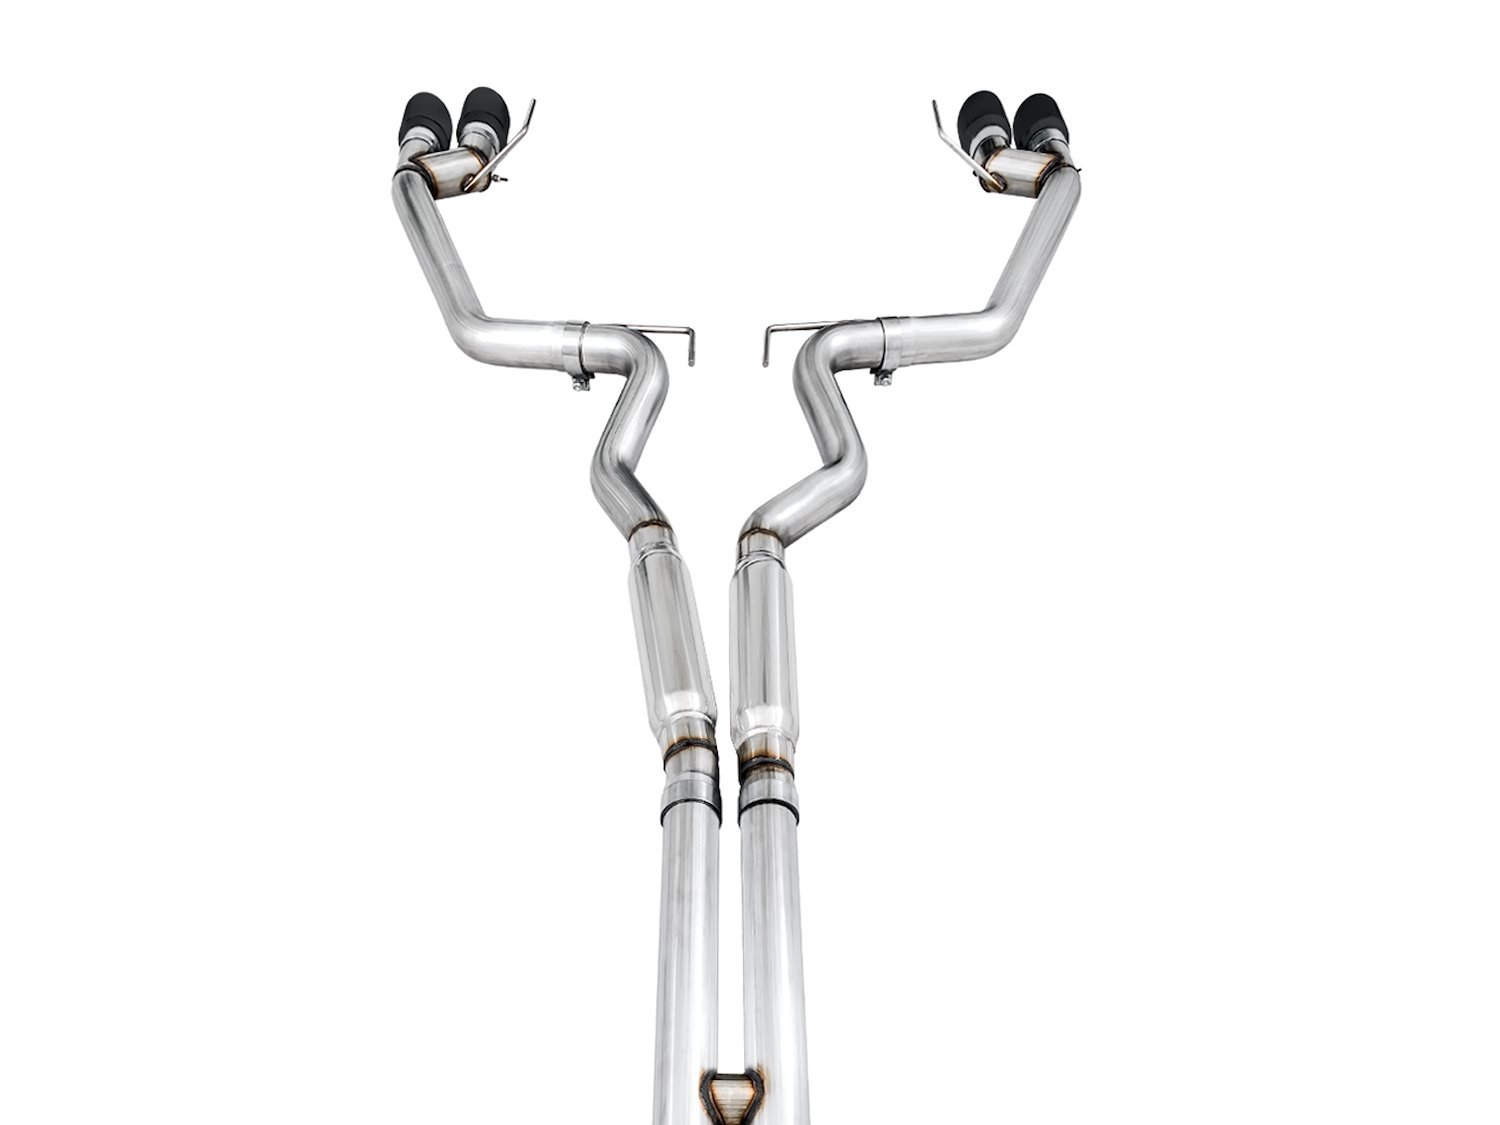 AWE Track Edition Cat-back Exhaust for the 2018+ Mustang GT - Quad Diamond Black Tips